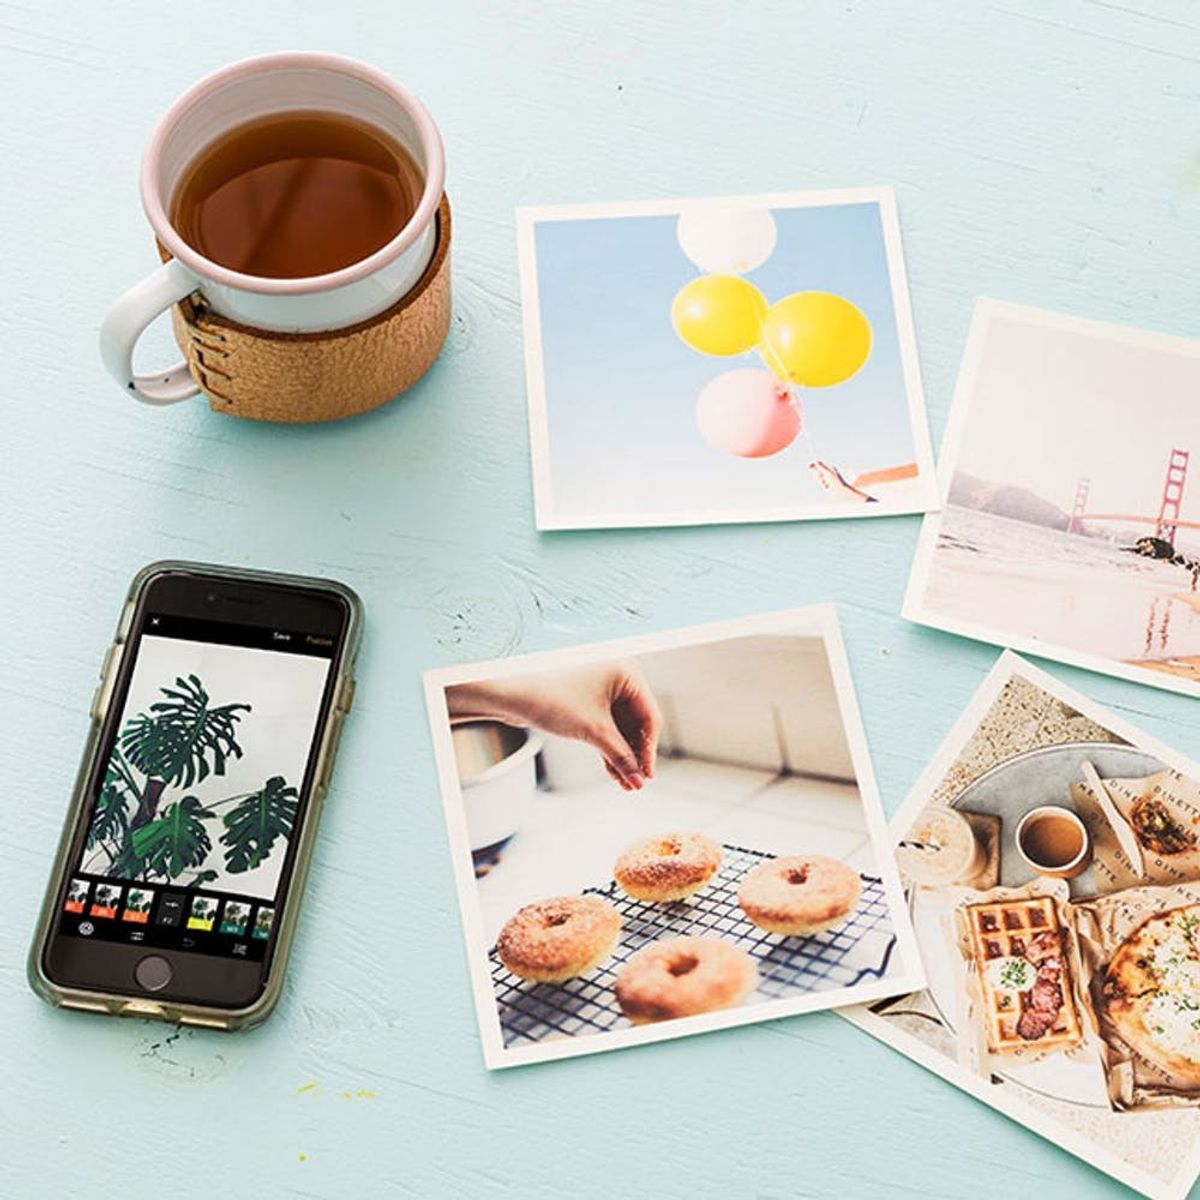 Learn Smartphone Photo Editing Secrets Using 5 Different Apps